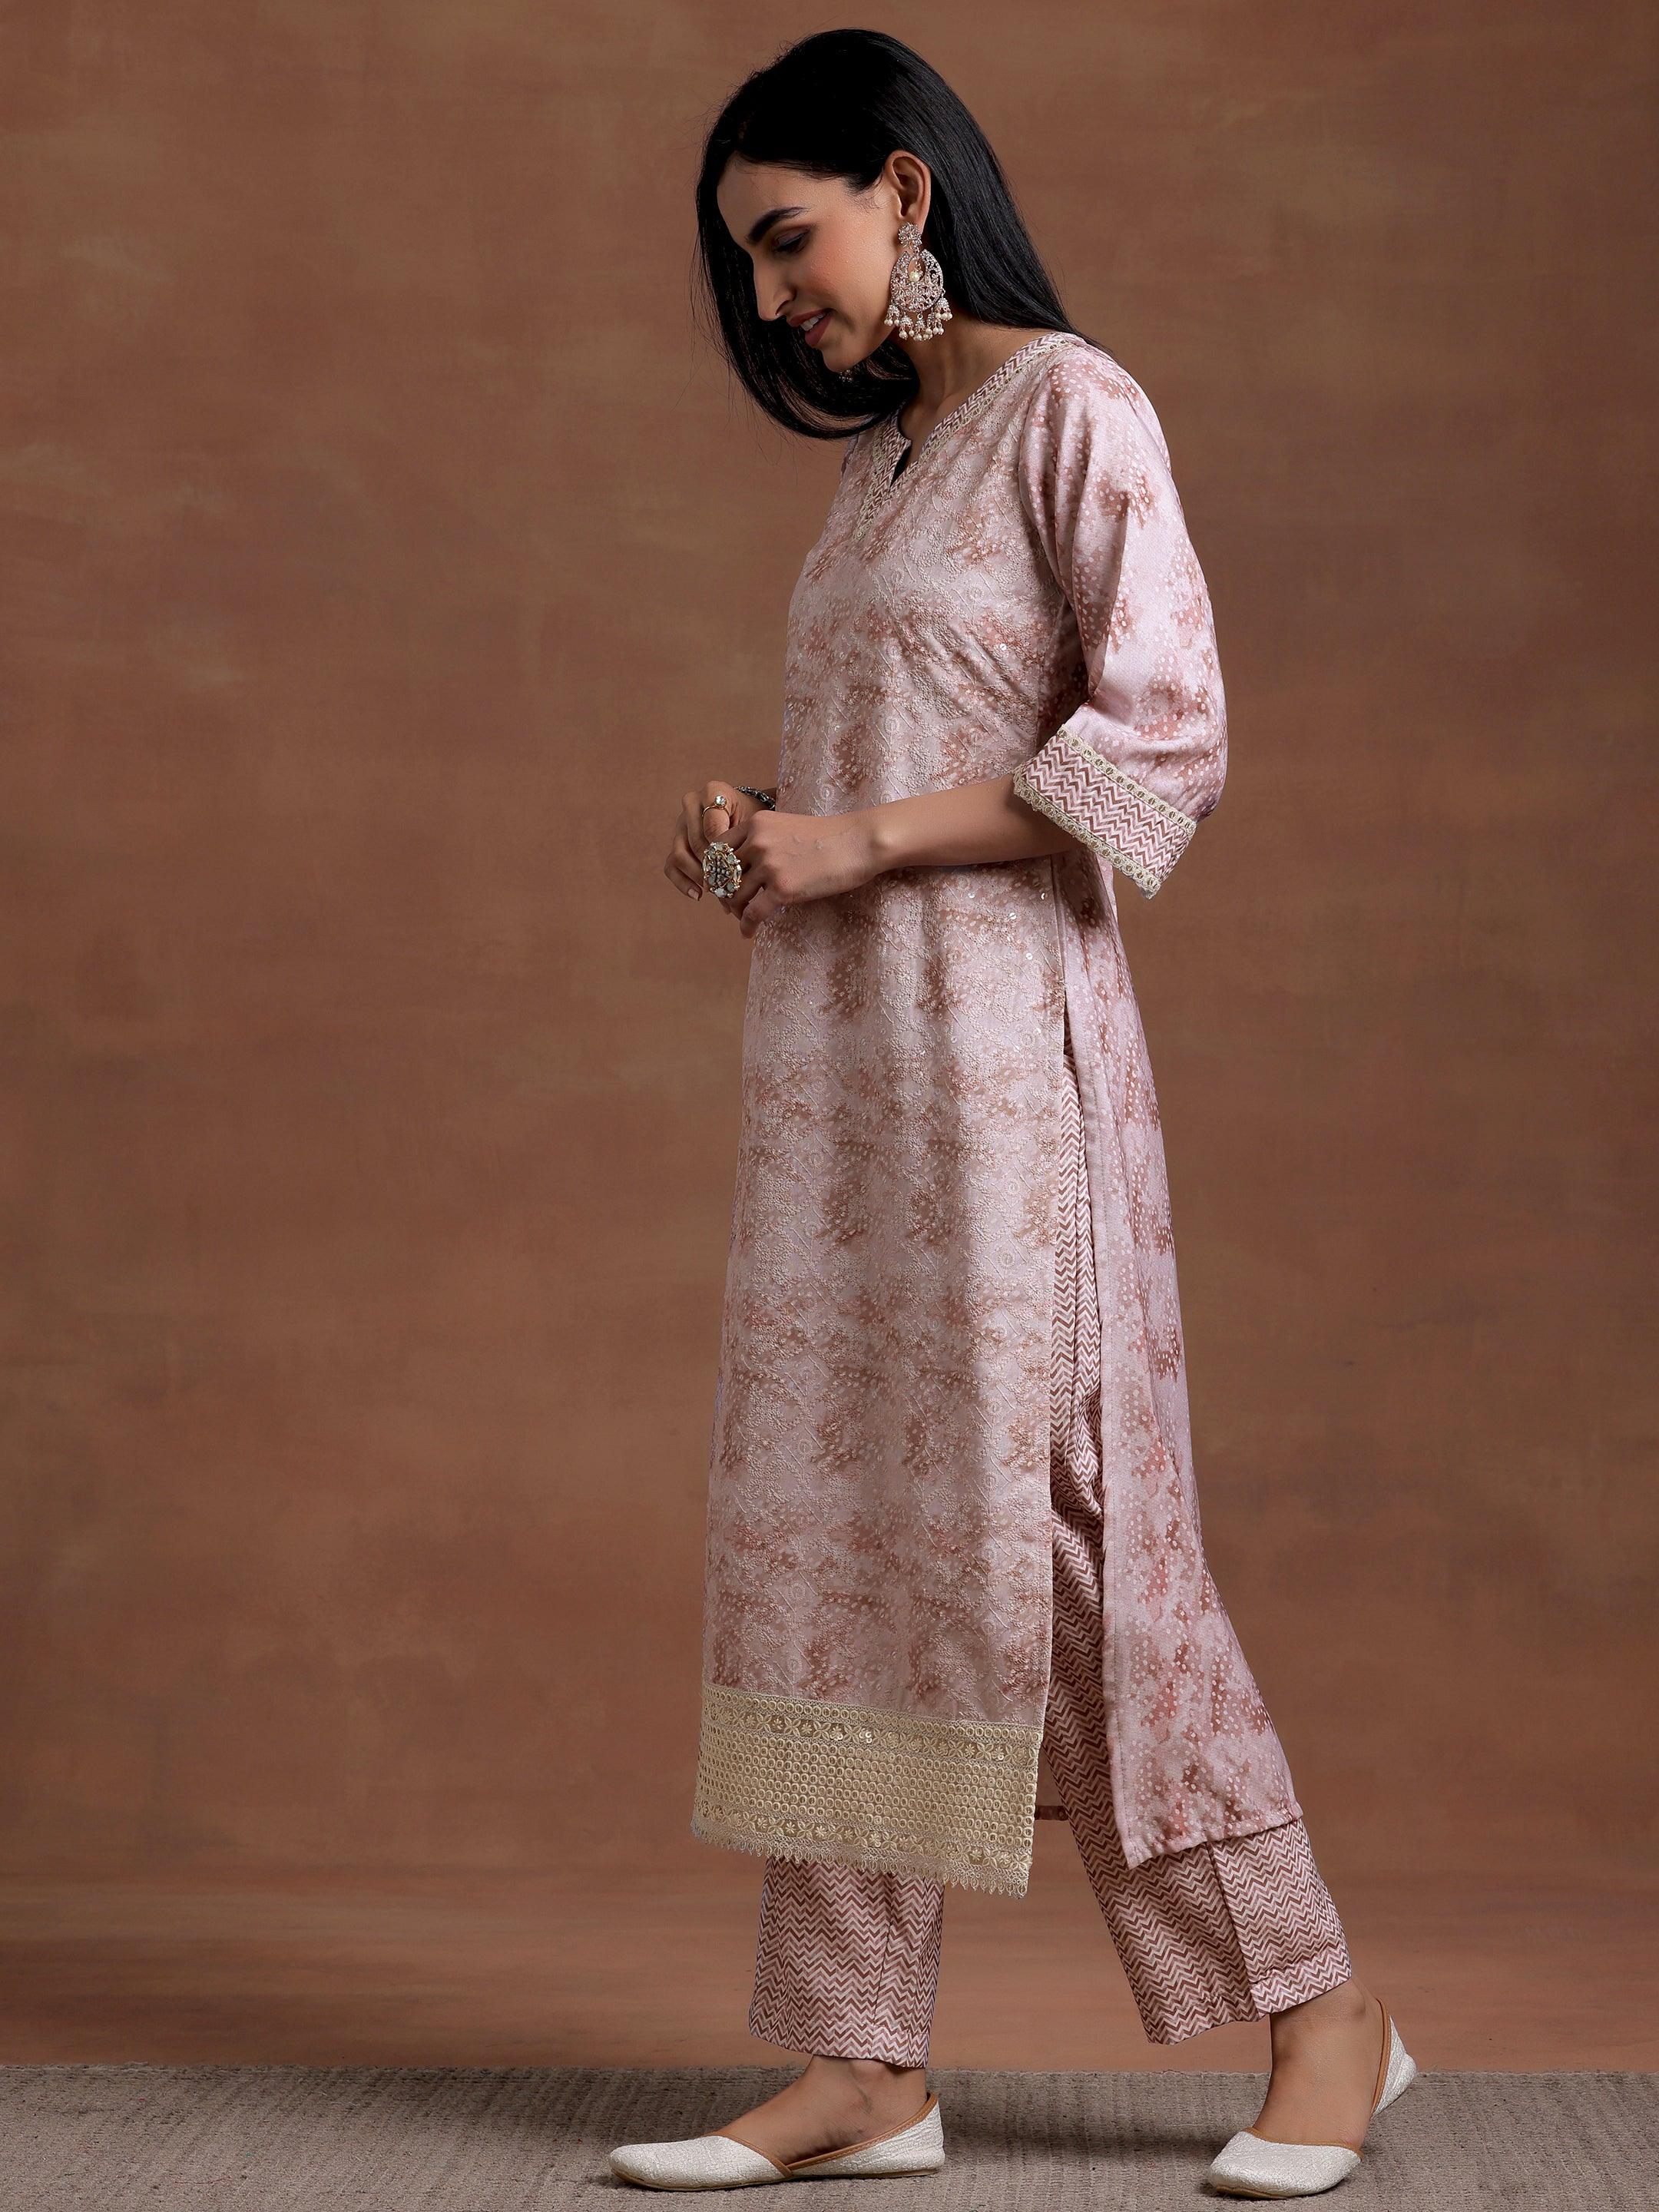 Beige Embroidered Cotton Blend Straight Suit With Dupatta